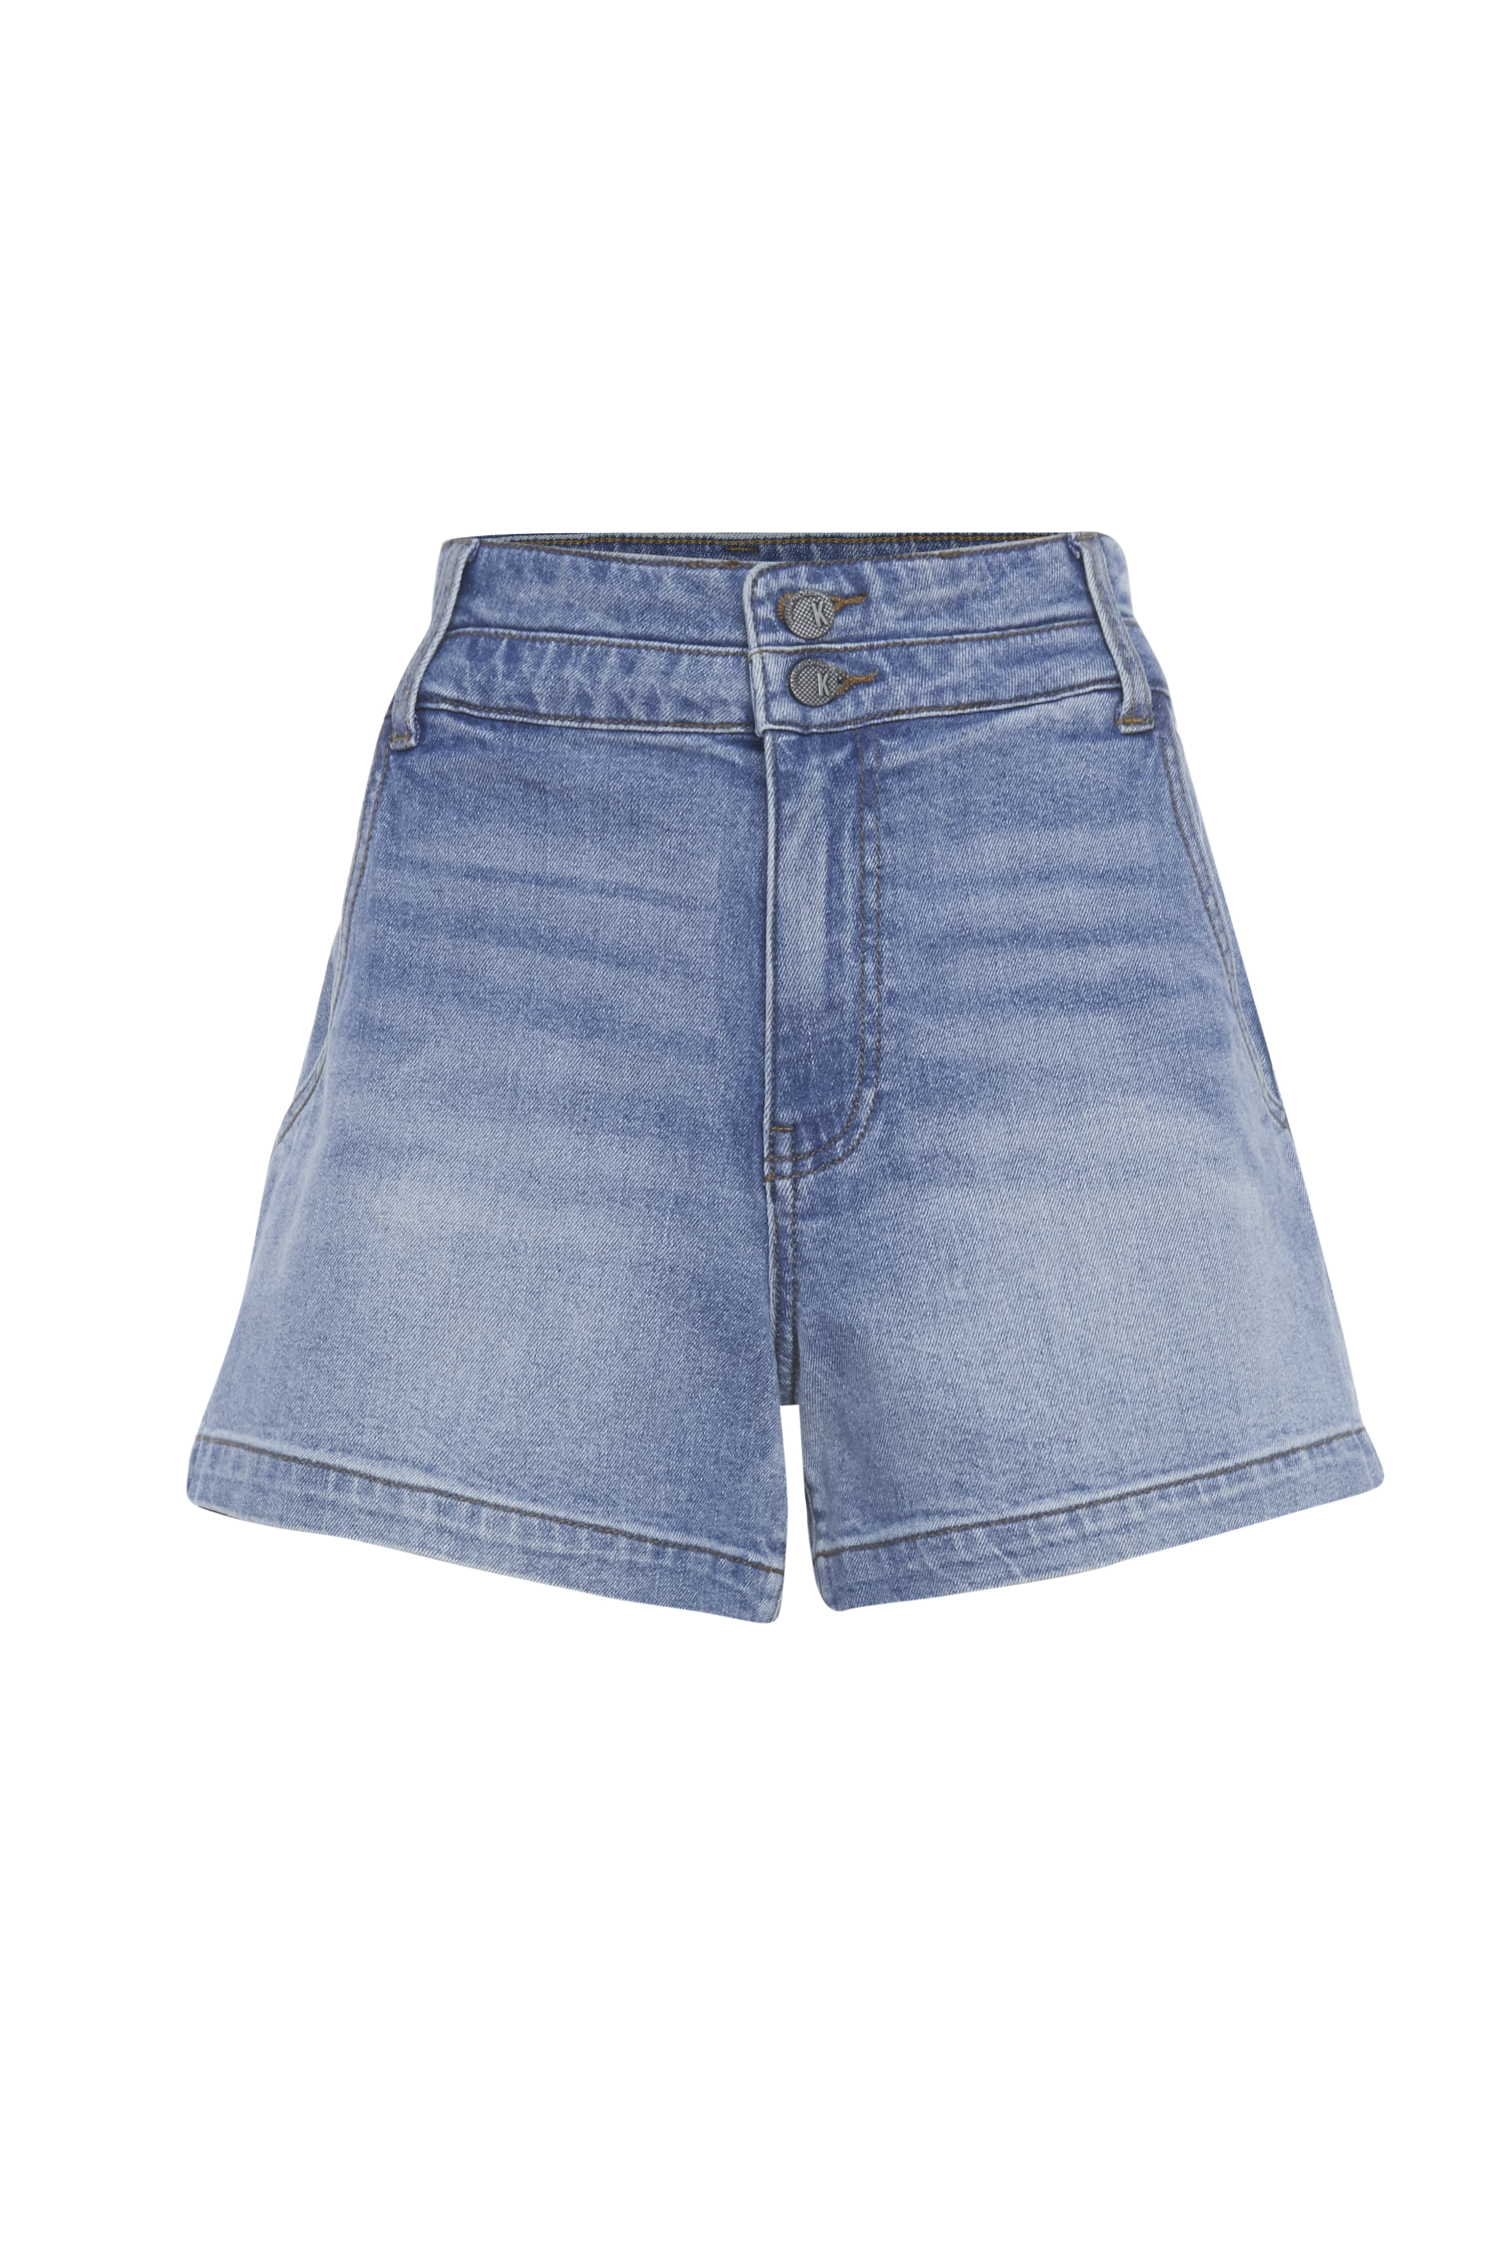 KUT from the Kloth High Rise Double Waistband Shorts